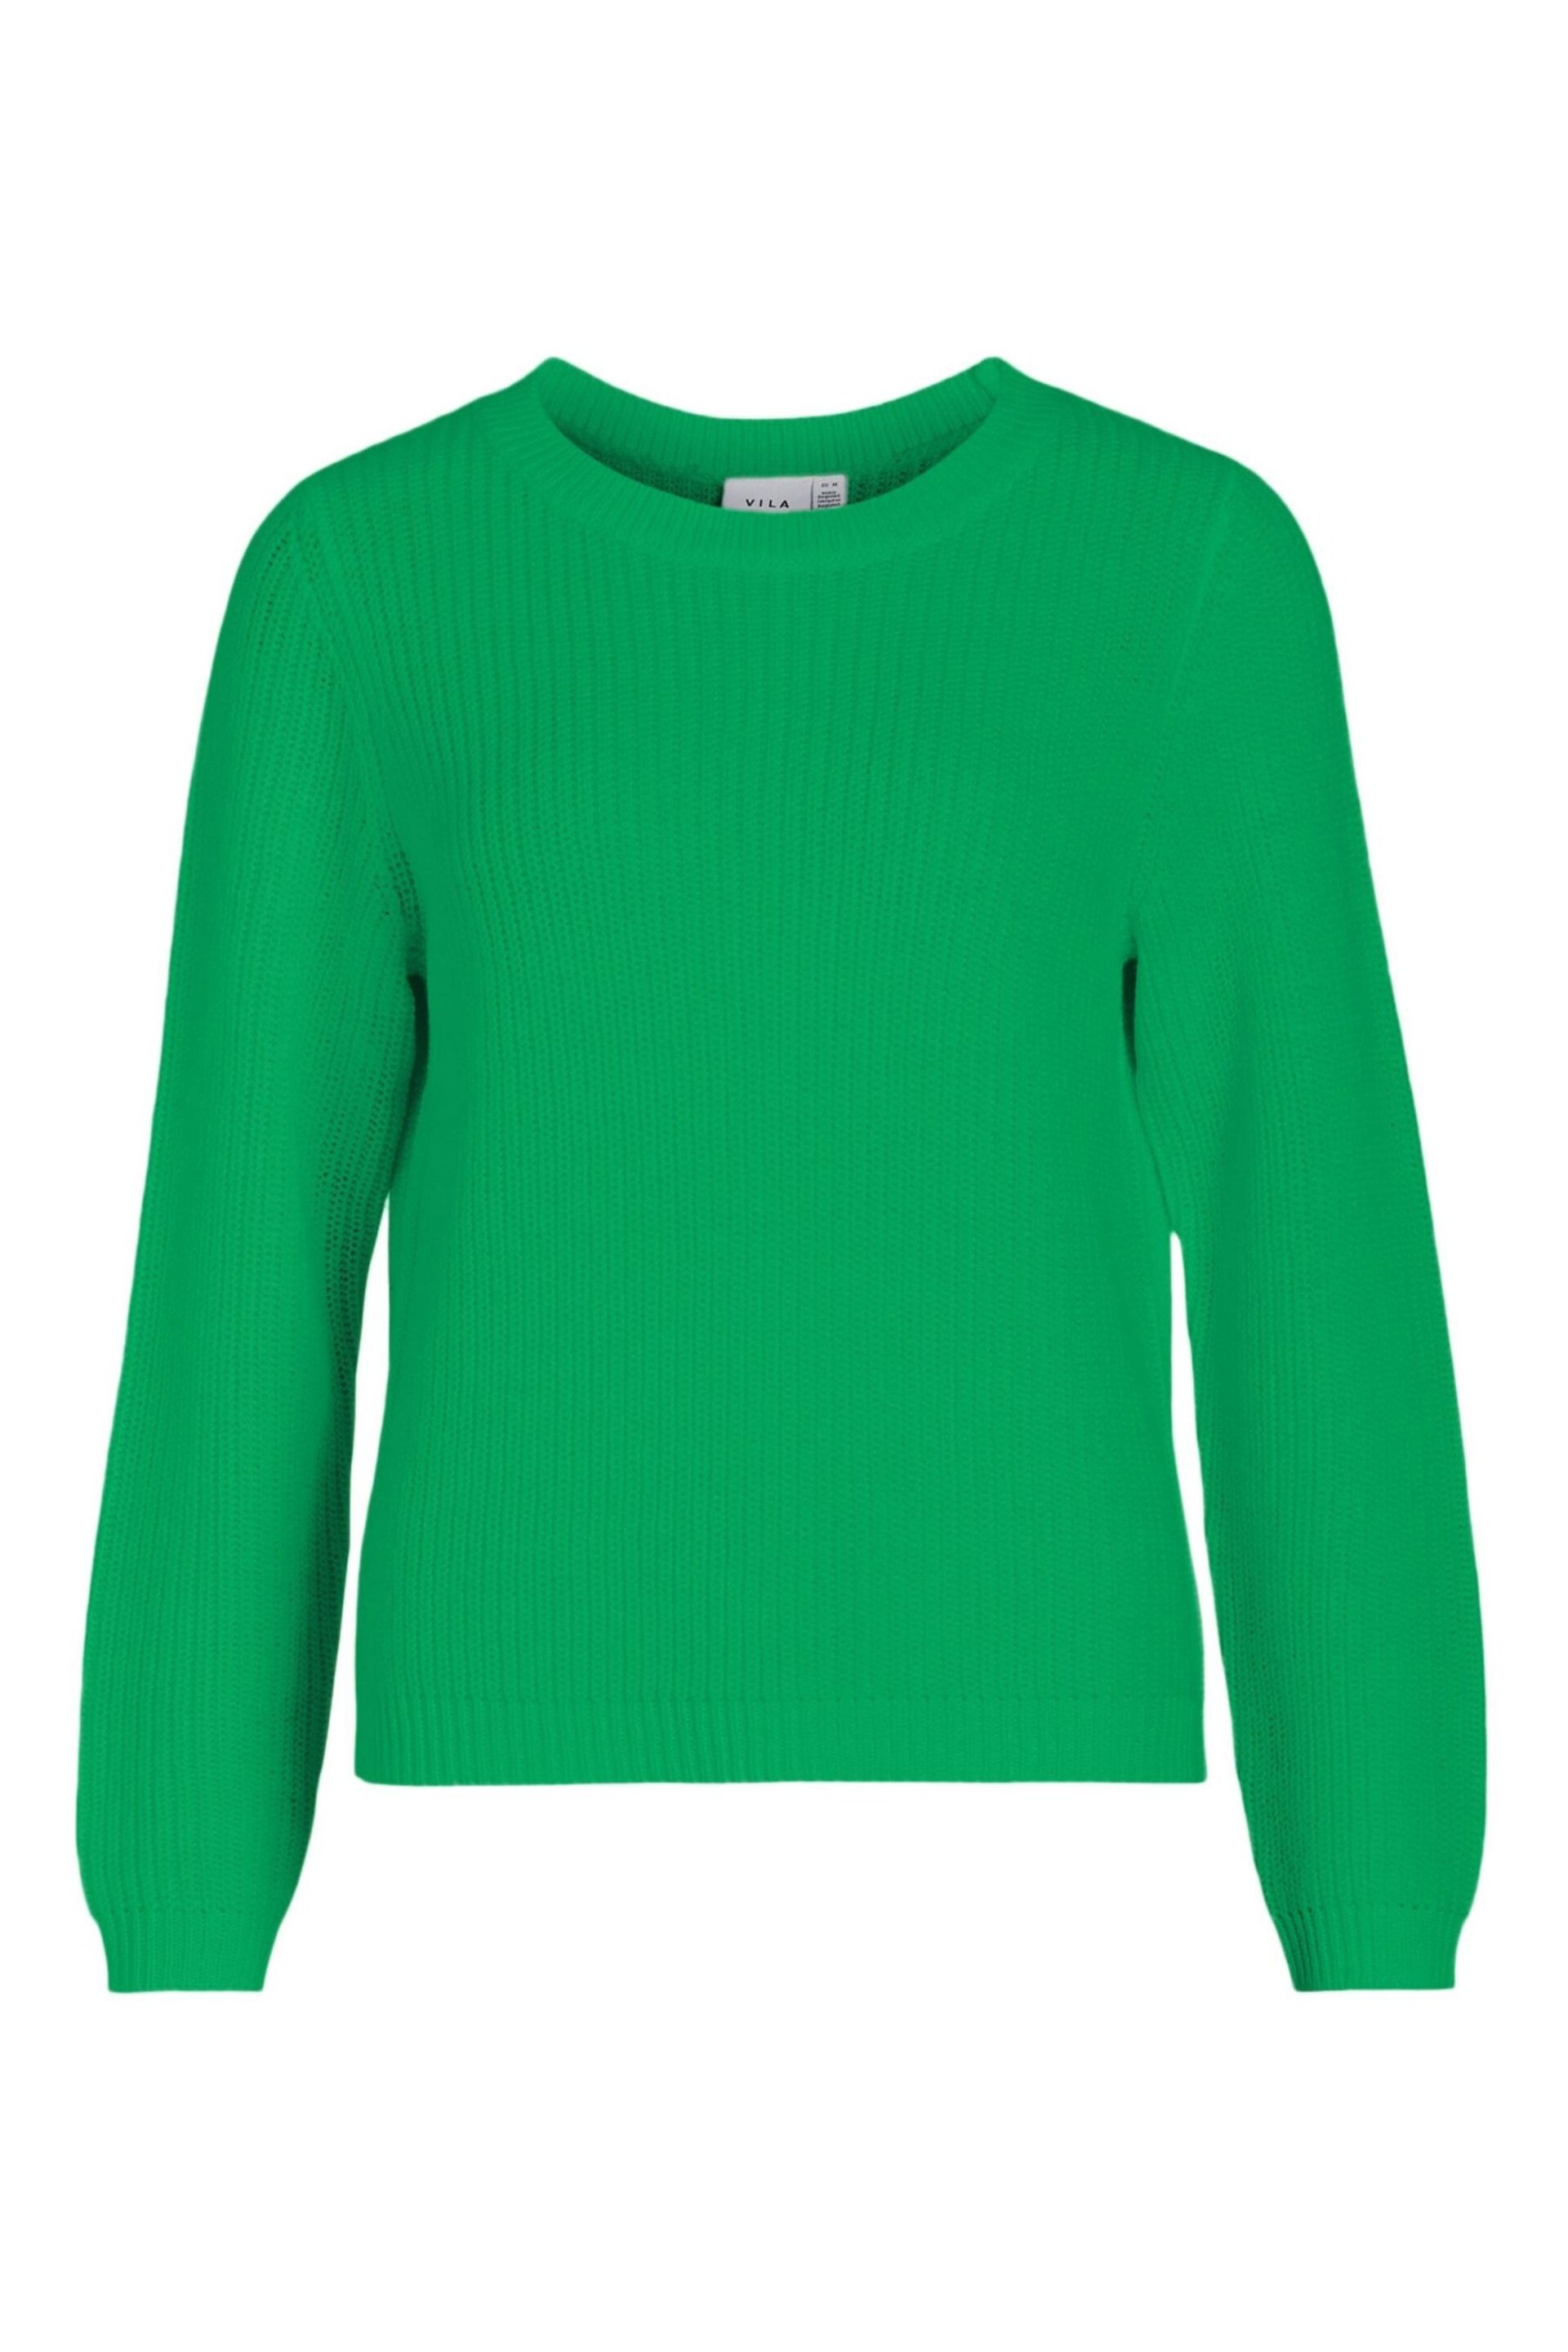 VILA Green Round Neck Cosy Knitted Jumper - Image 2 of 2